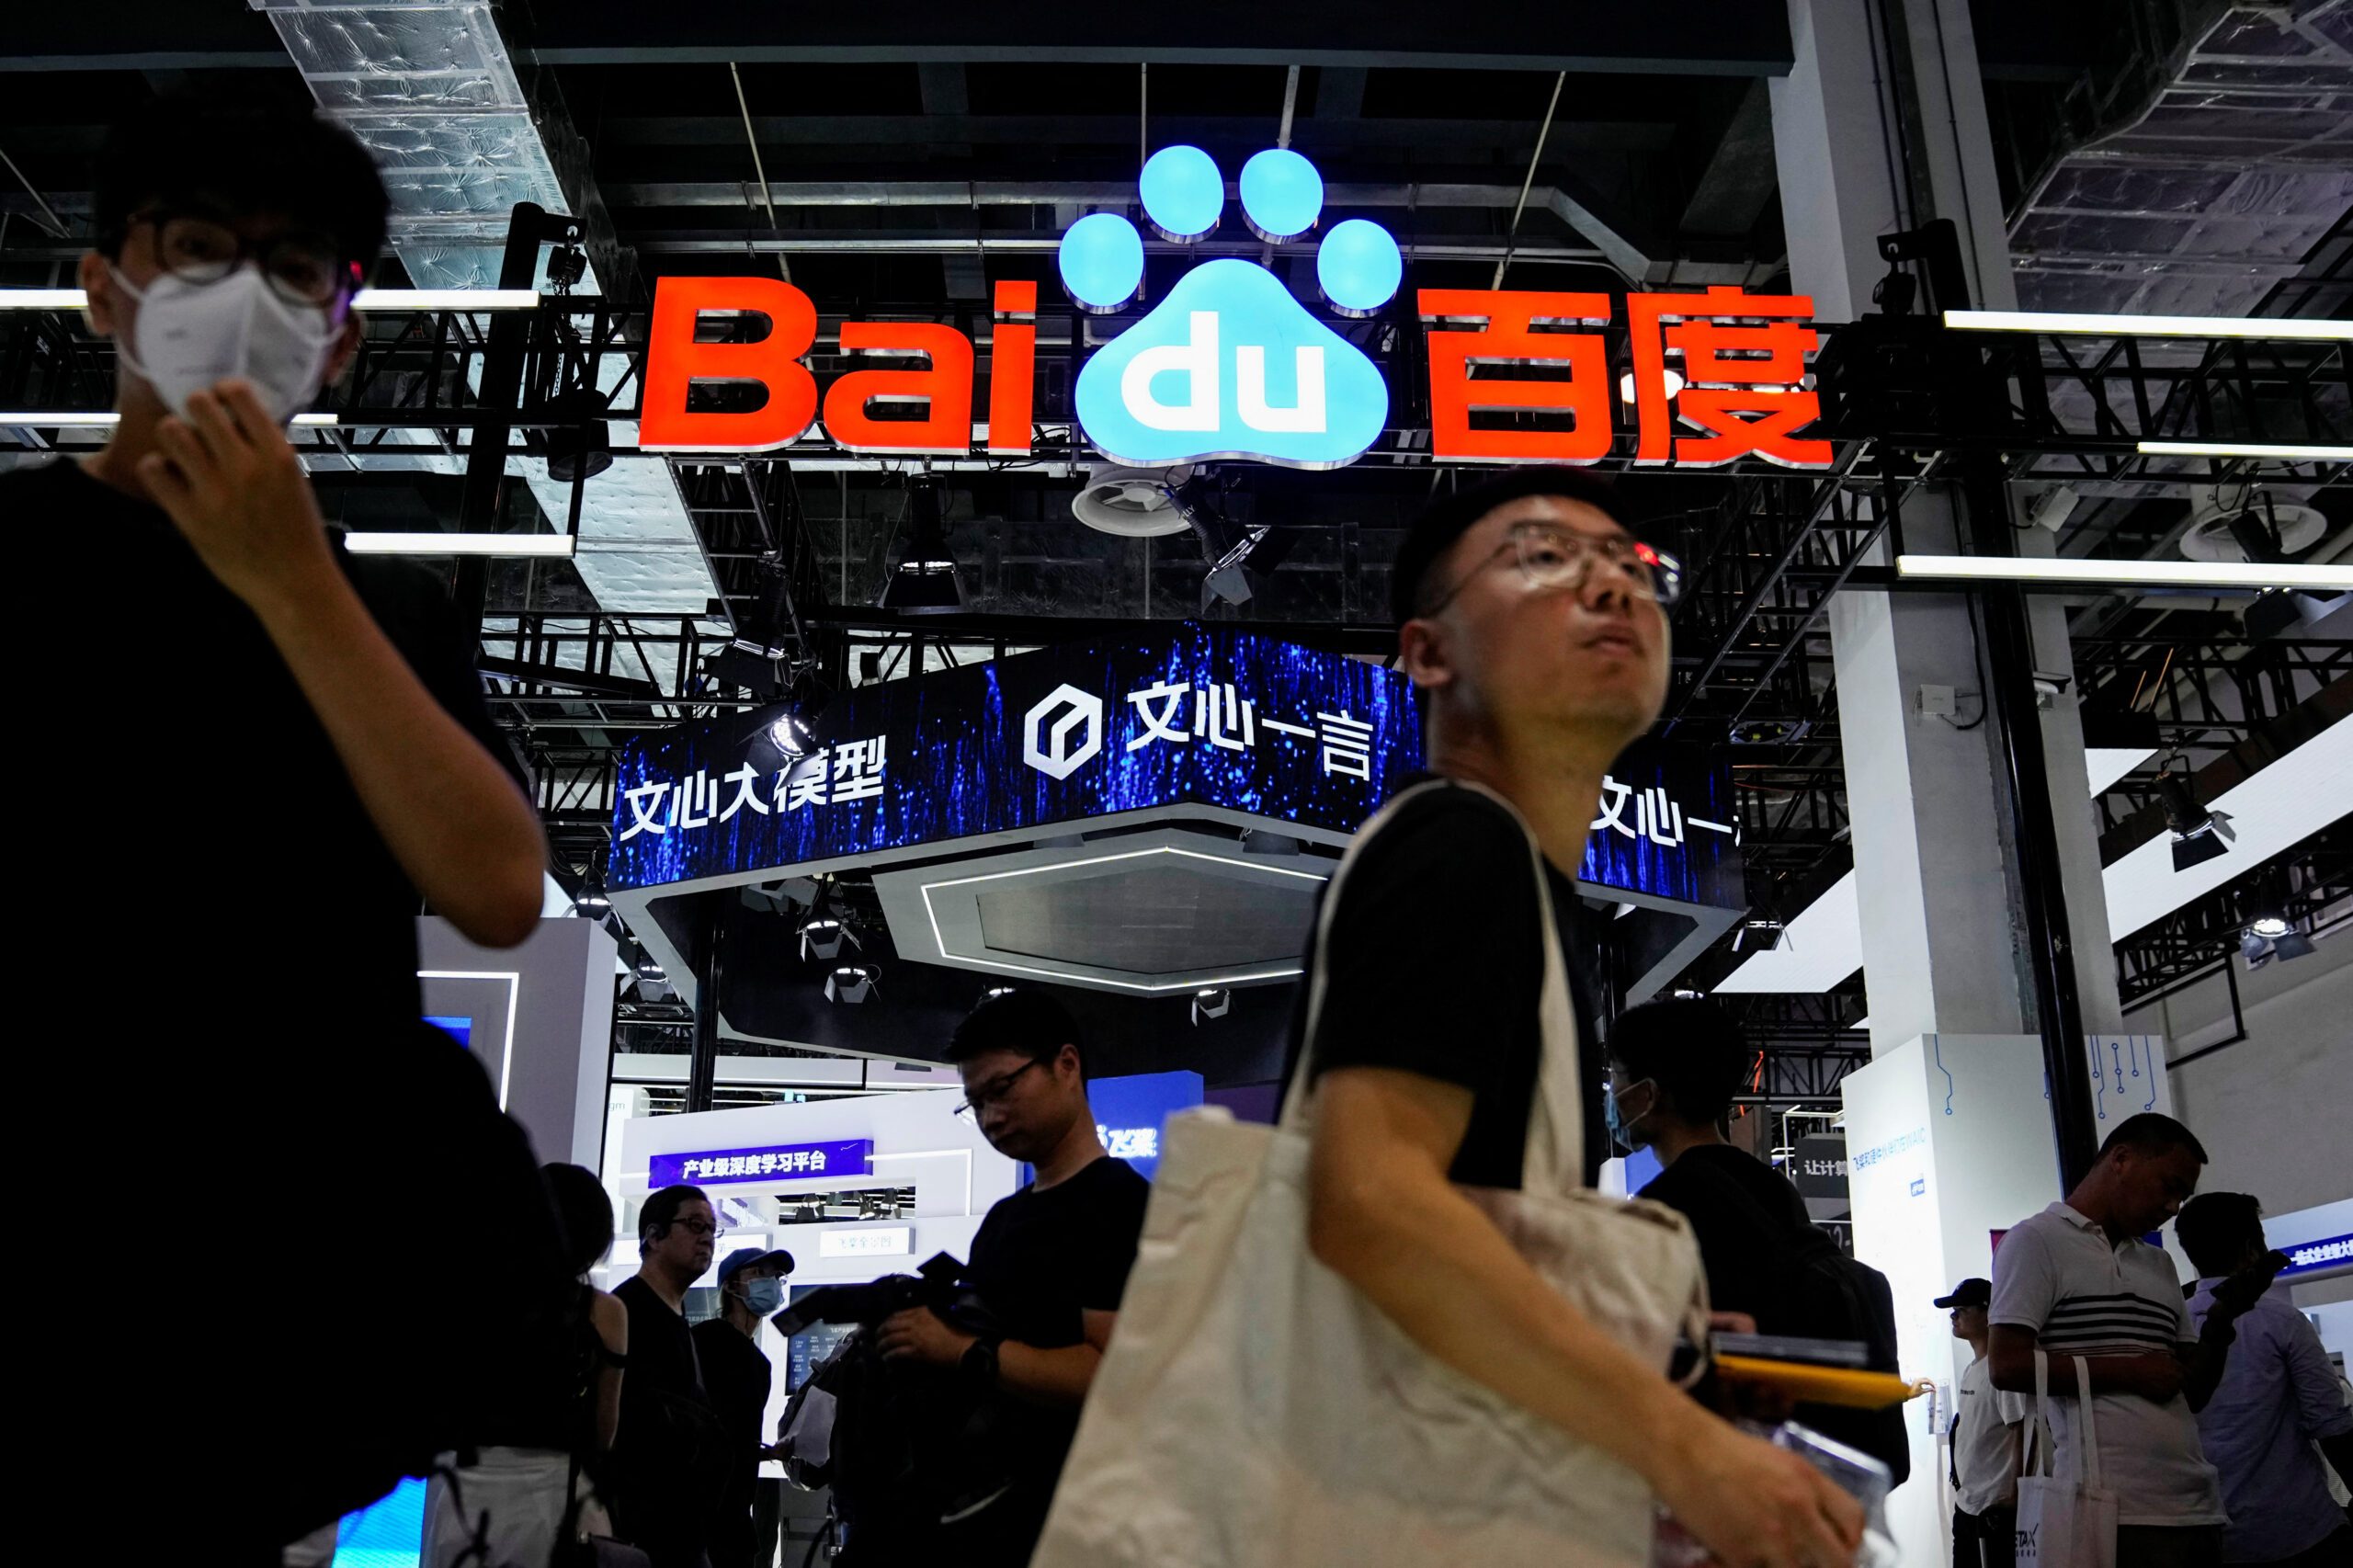 China's state planner holds meeting with private firms such as Baidu